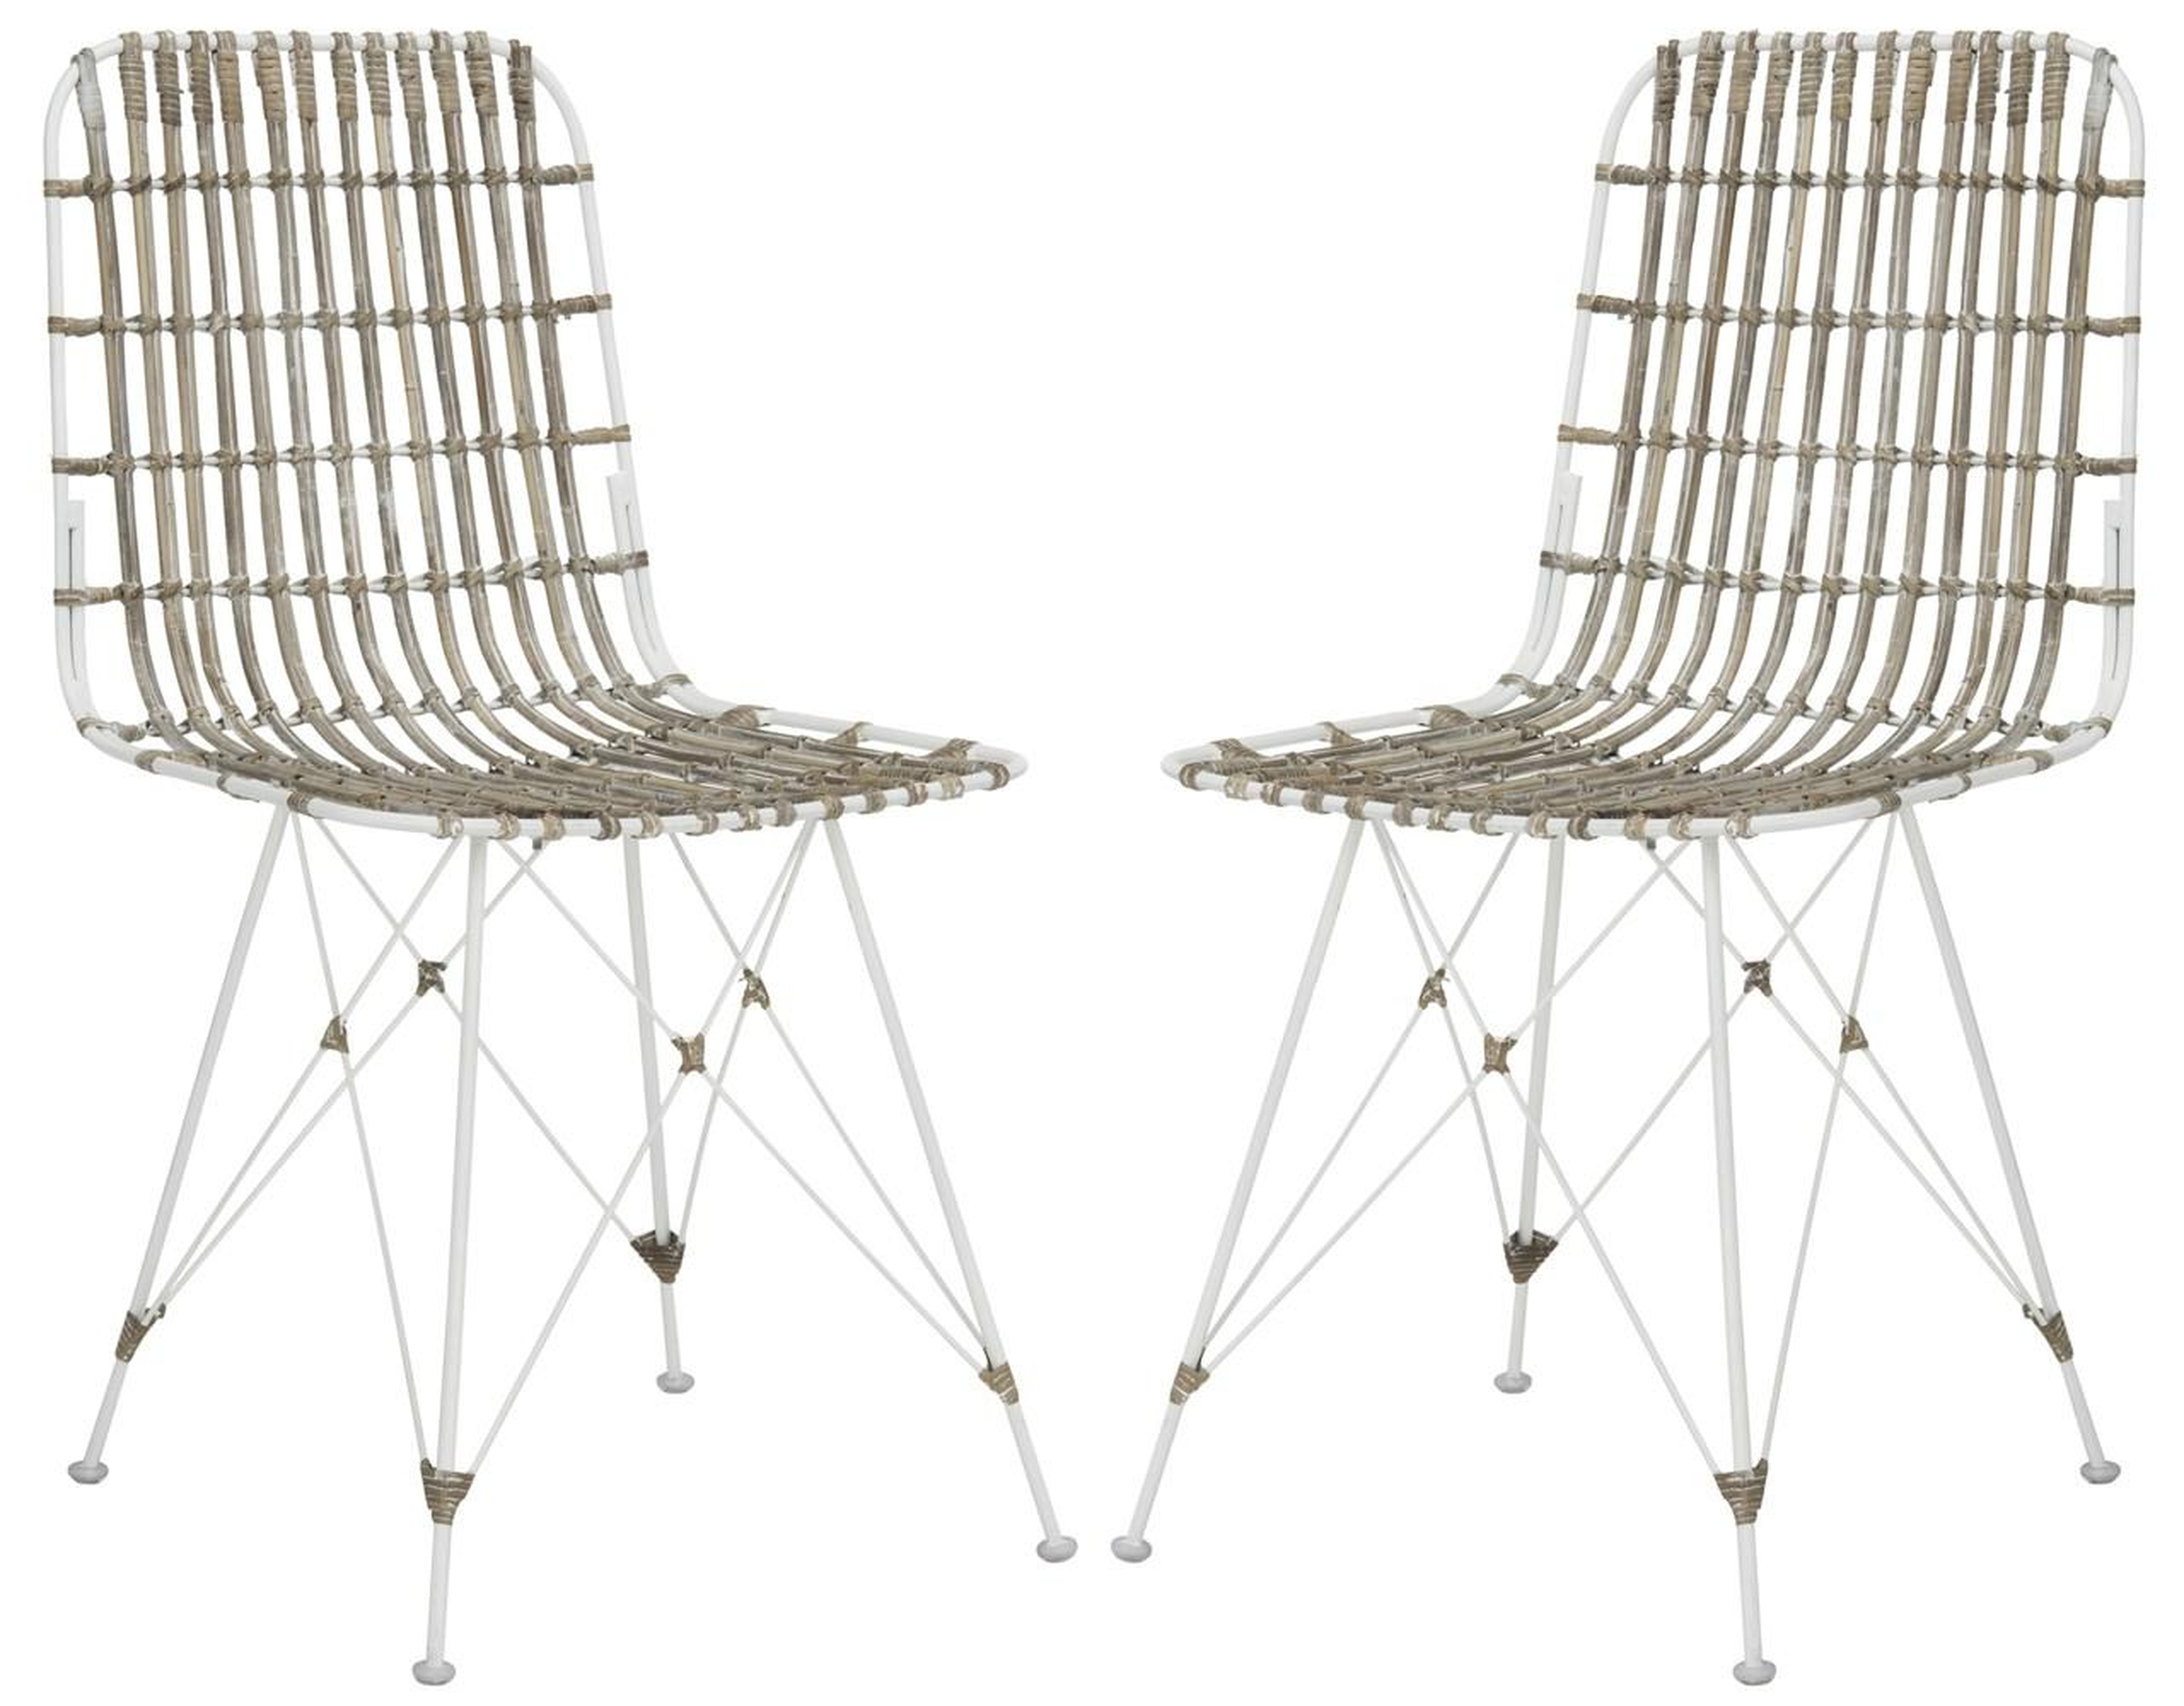 Minerva Wicker Dining Chair (Set of 2) - White Wash - Arlo Home - Arlo Home